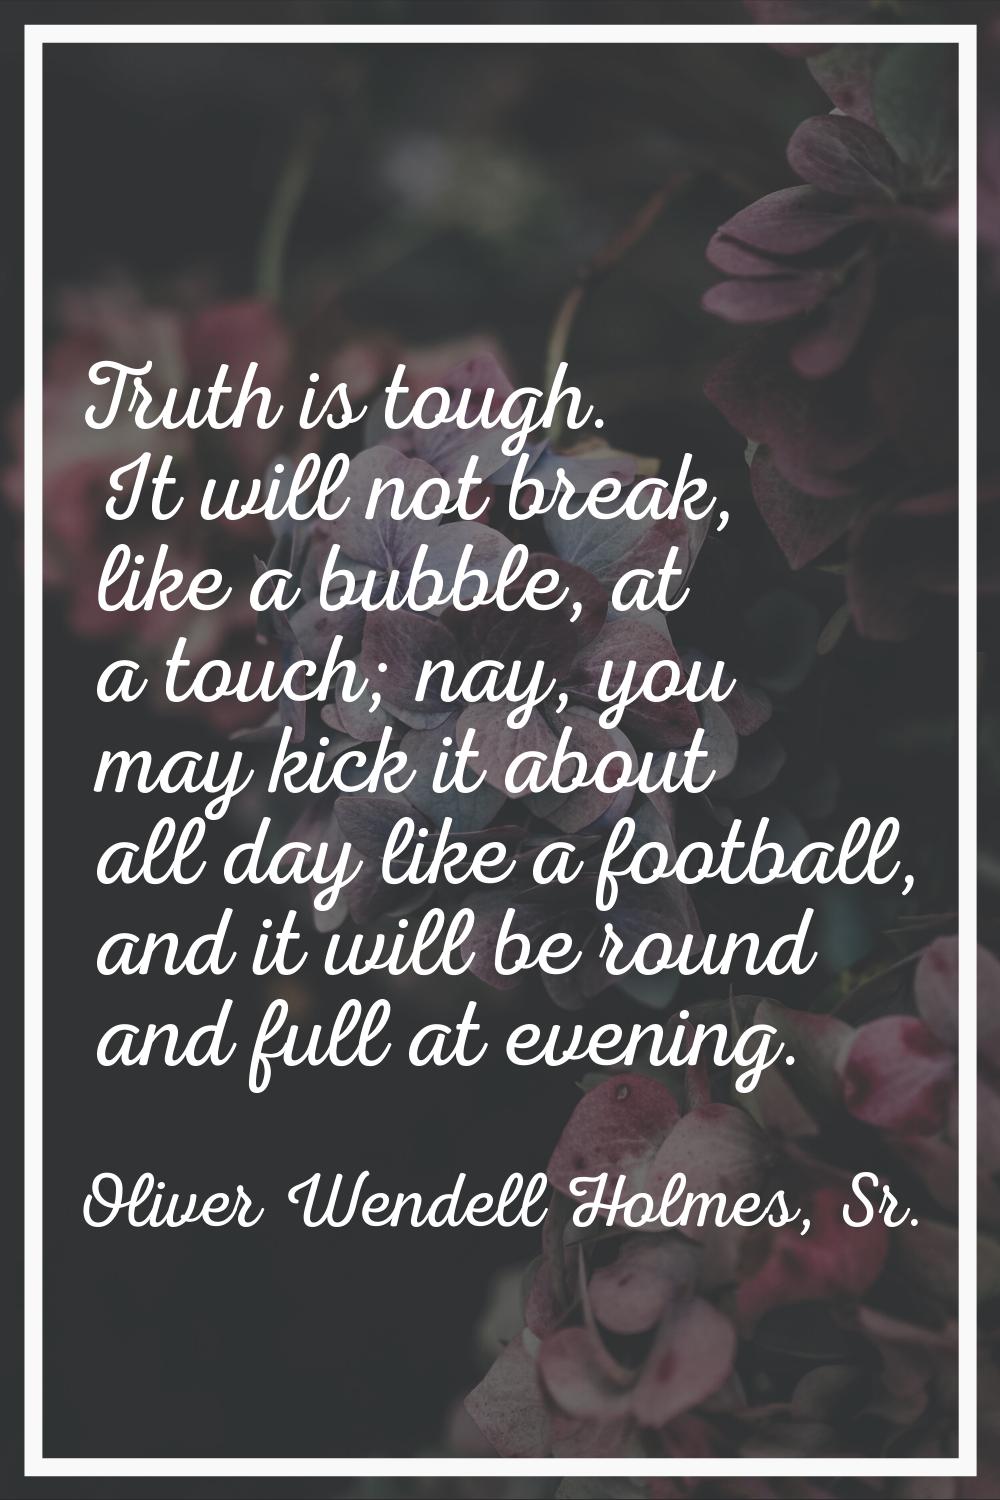 Truth is tough. It will not break, like a bubble, at a touch; nay, you may kick it about all day li